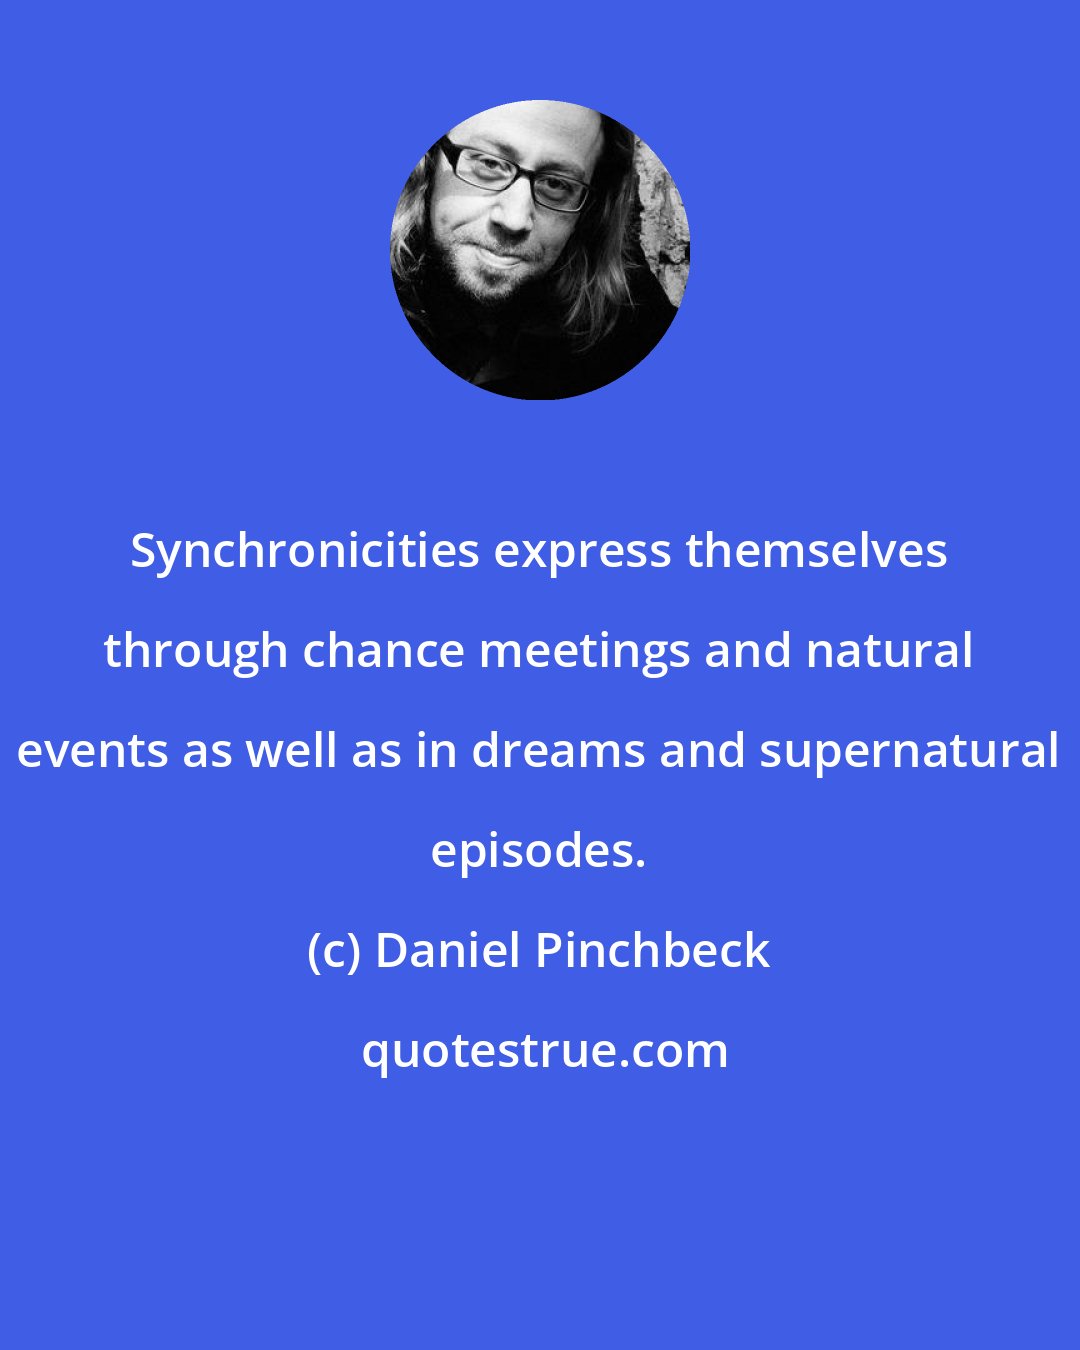 Daniel Pinchbeck: Synchronicities express themselves through chance meetings and natural events as well as in dreams and supernatural episodes.